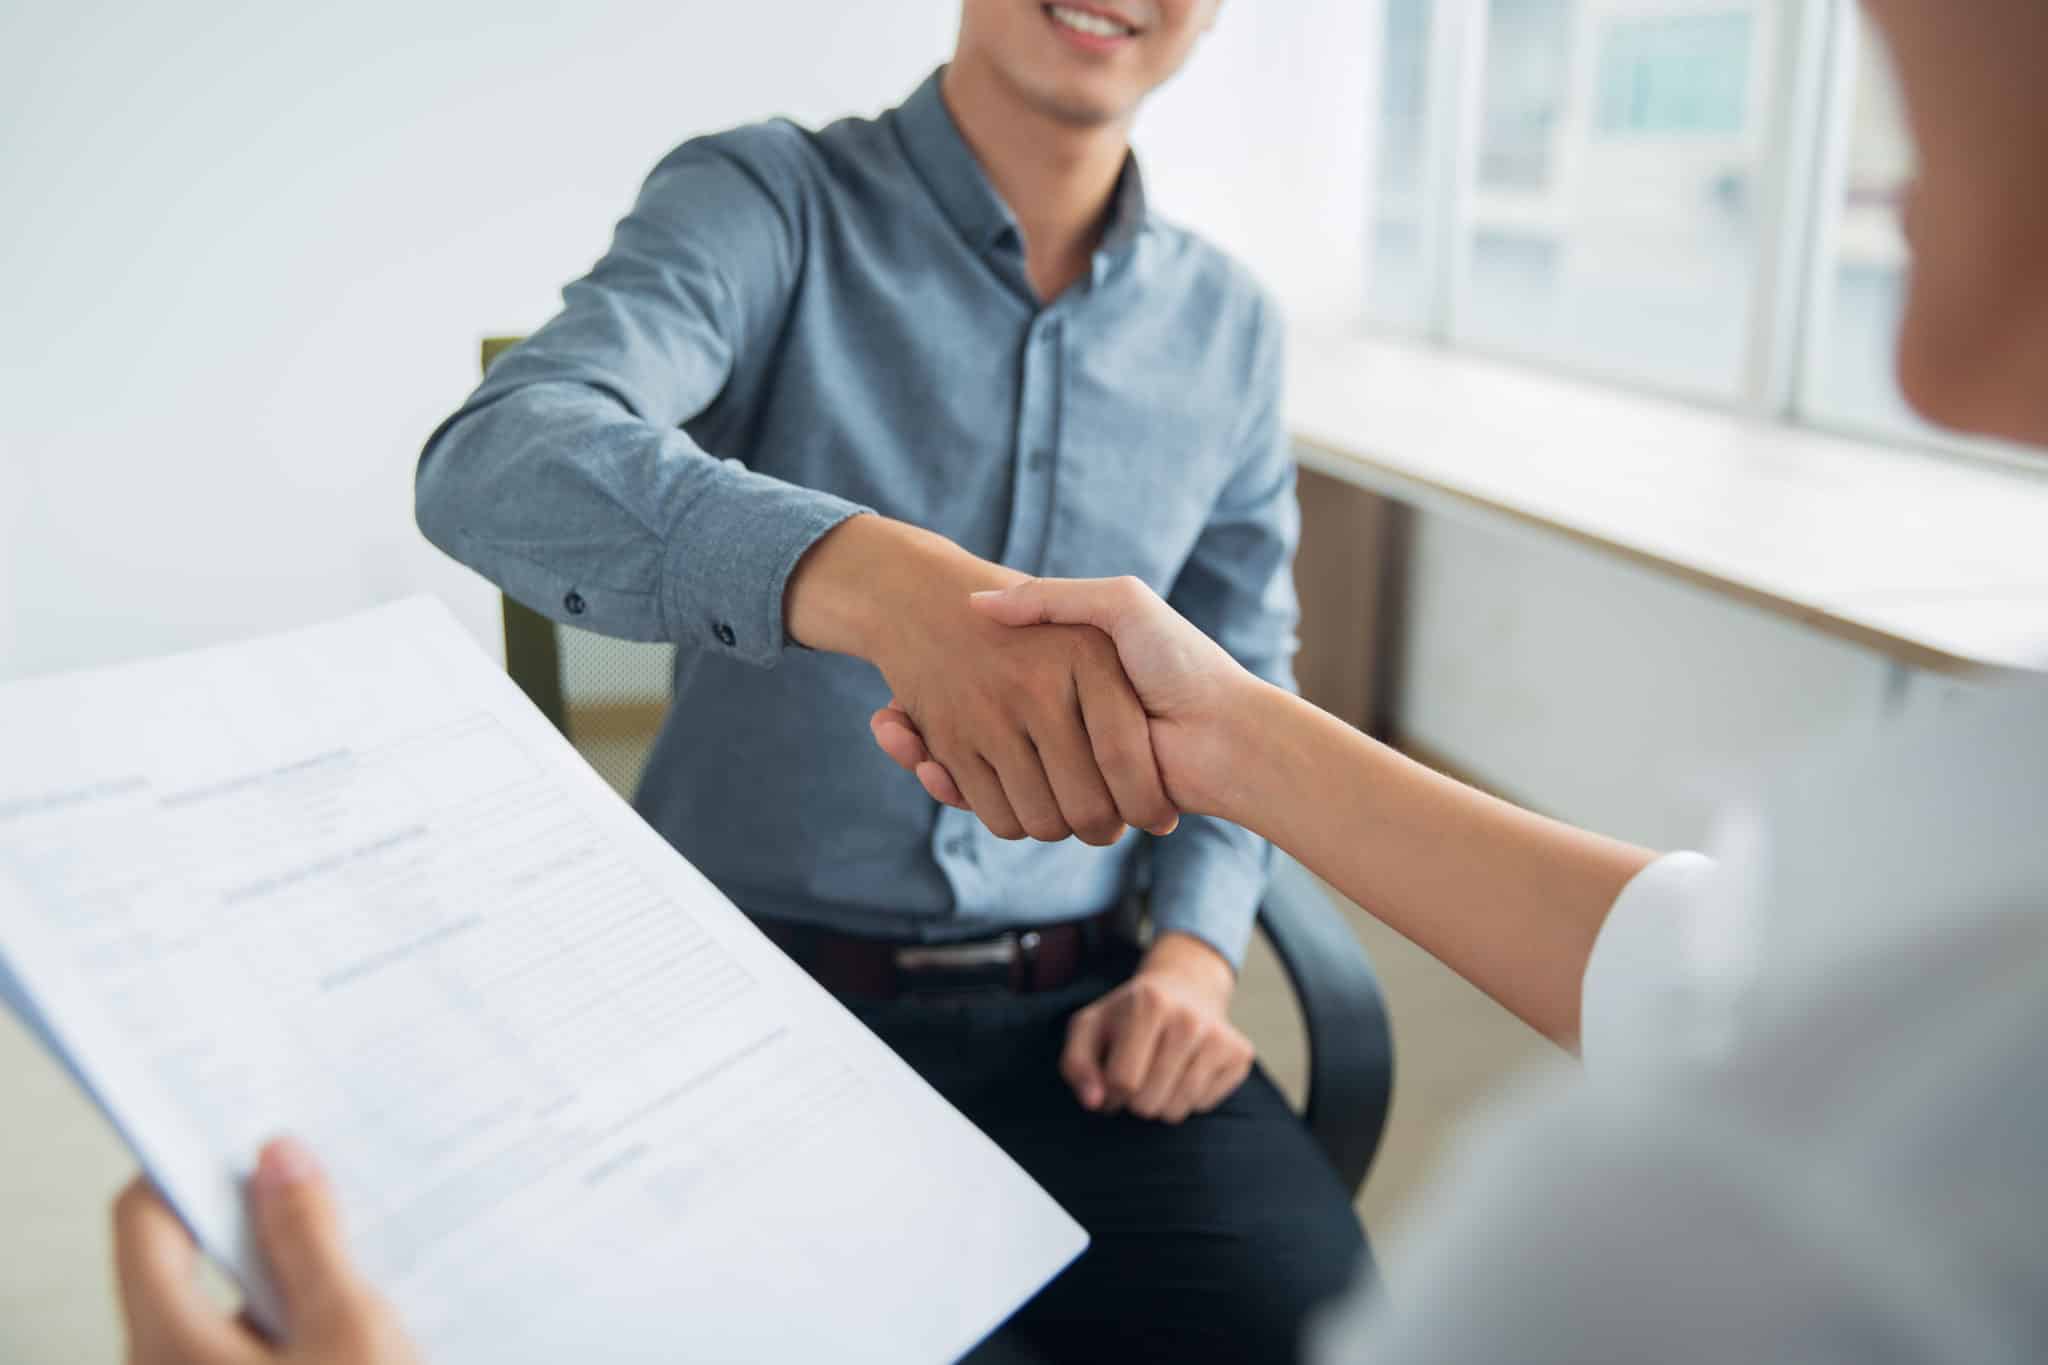 Two people shaking hands in a job interview